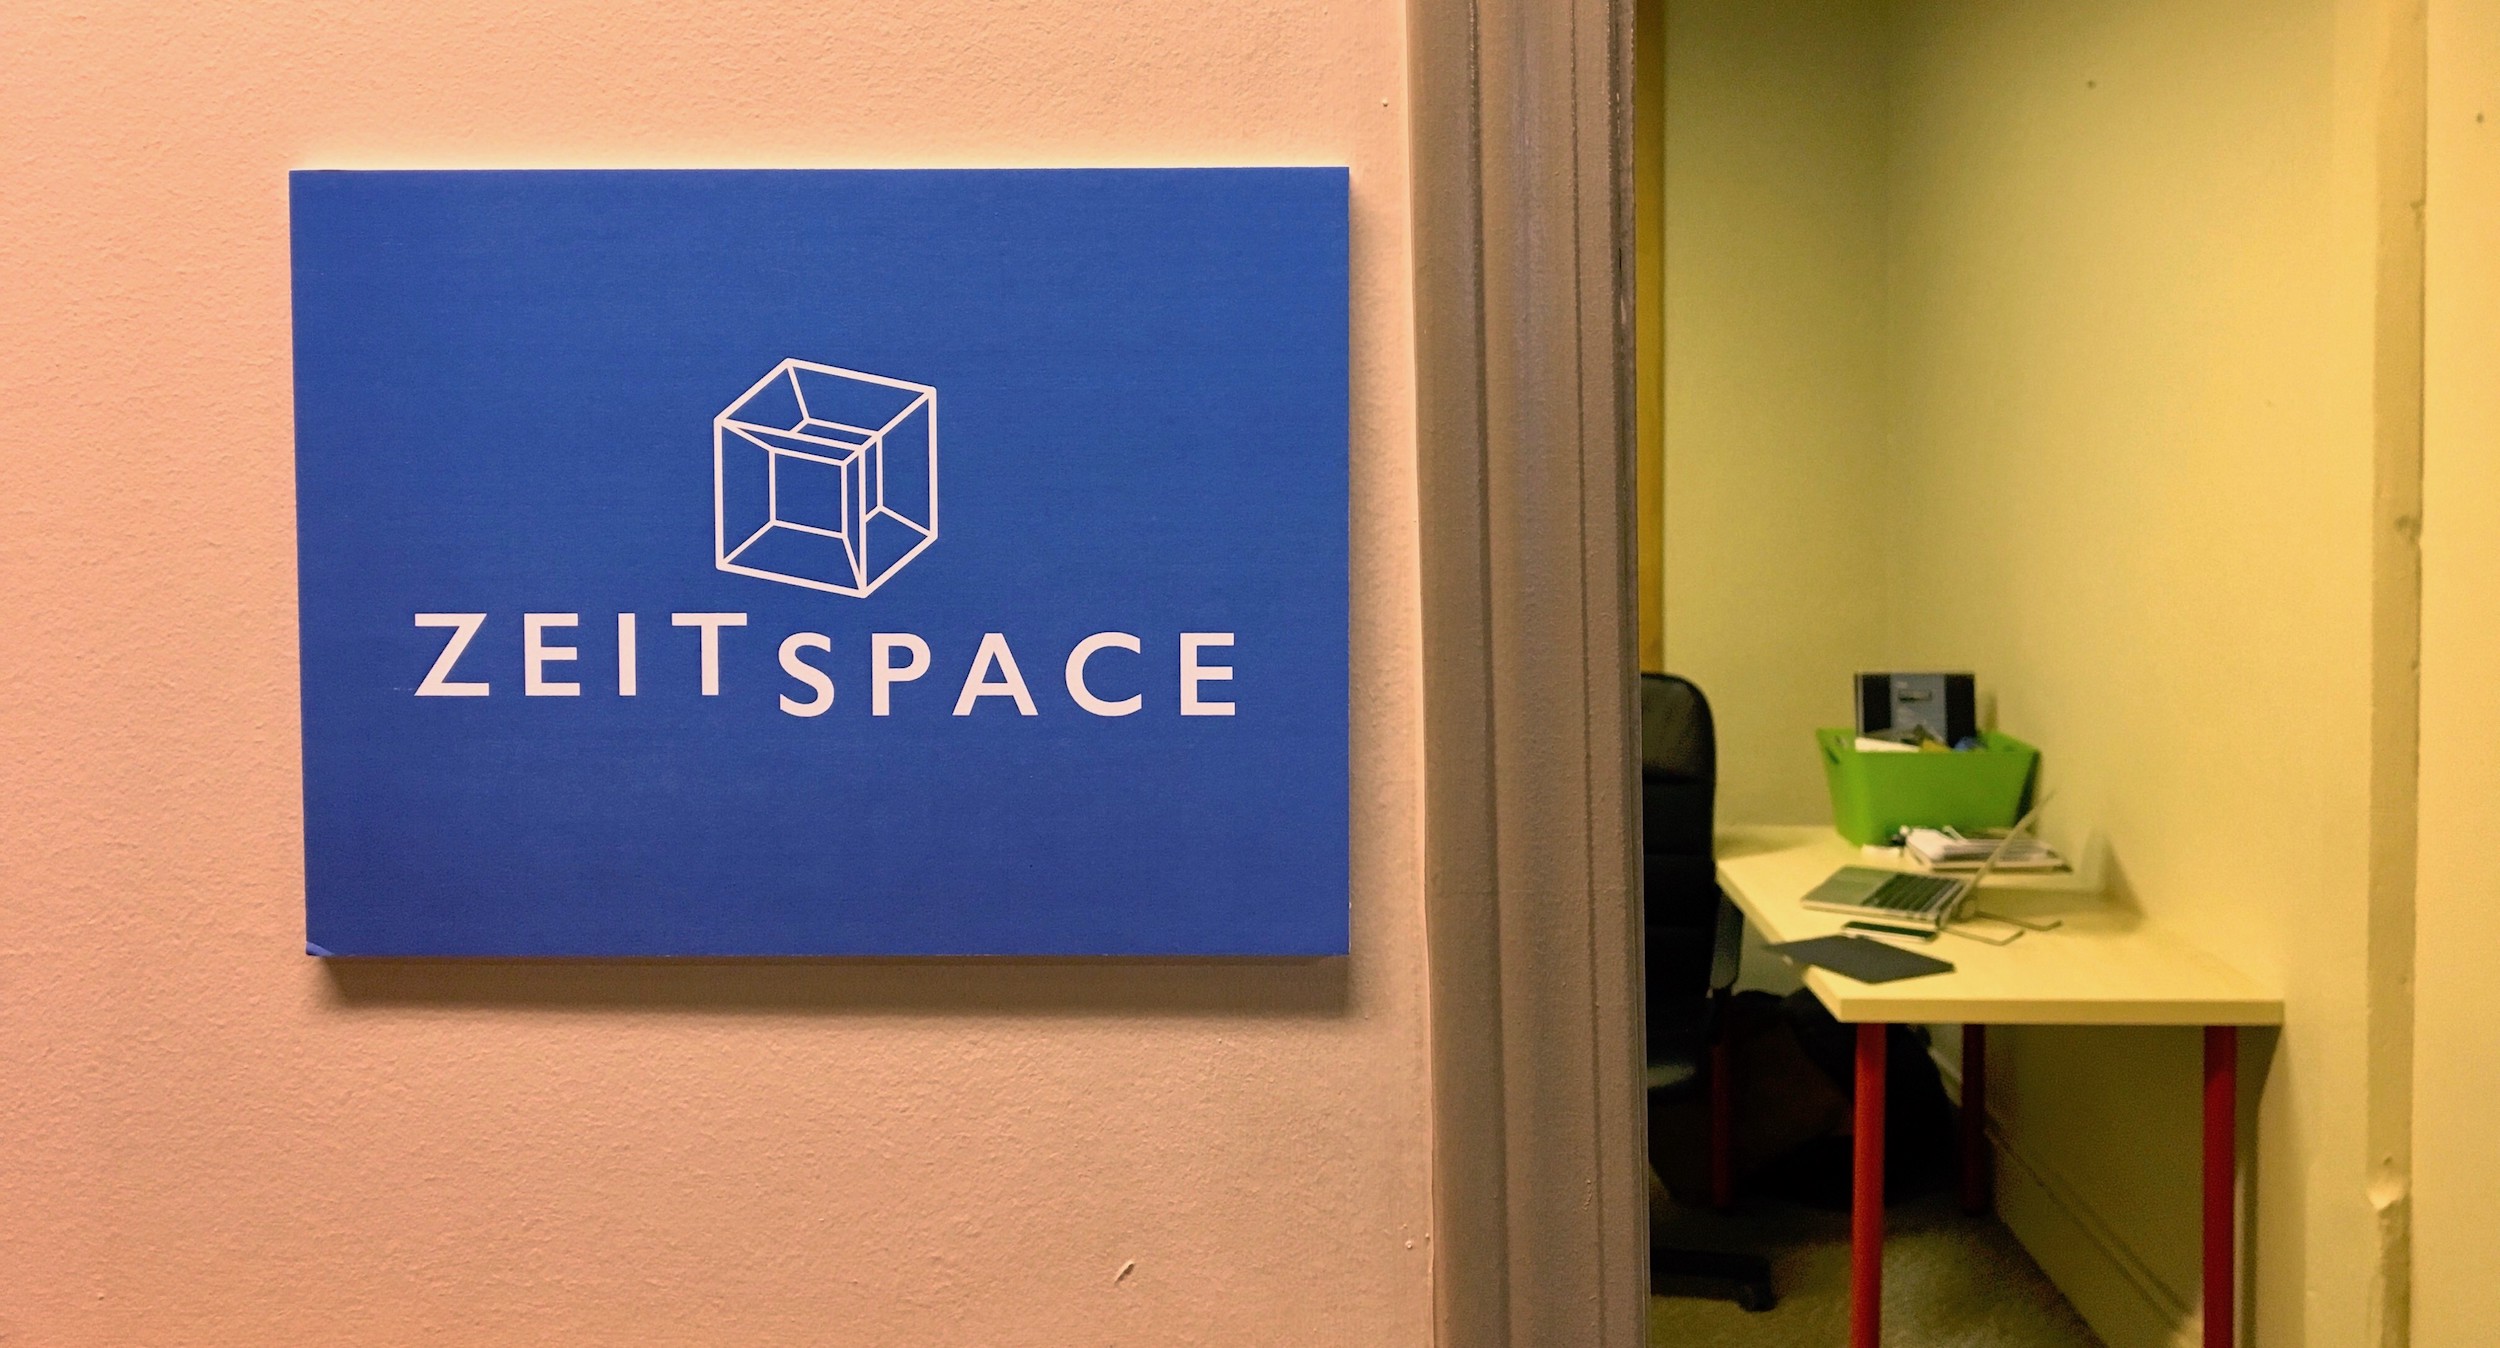 A Zeitspace sign on a wall next to an open door